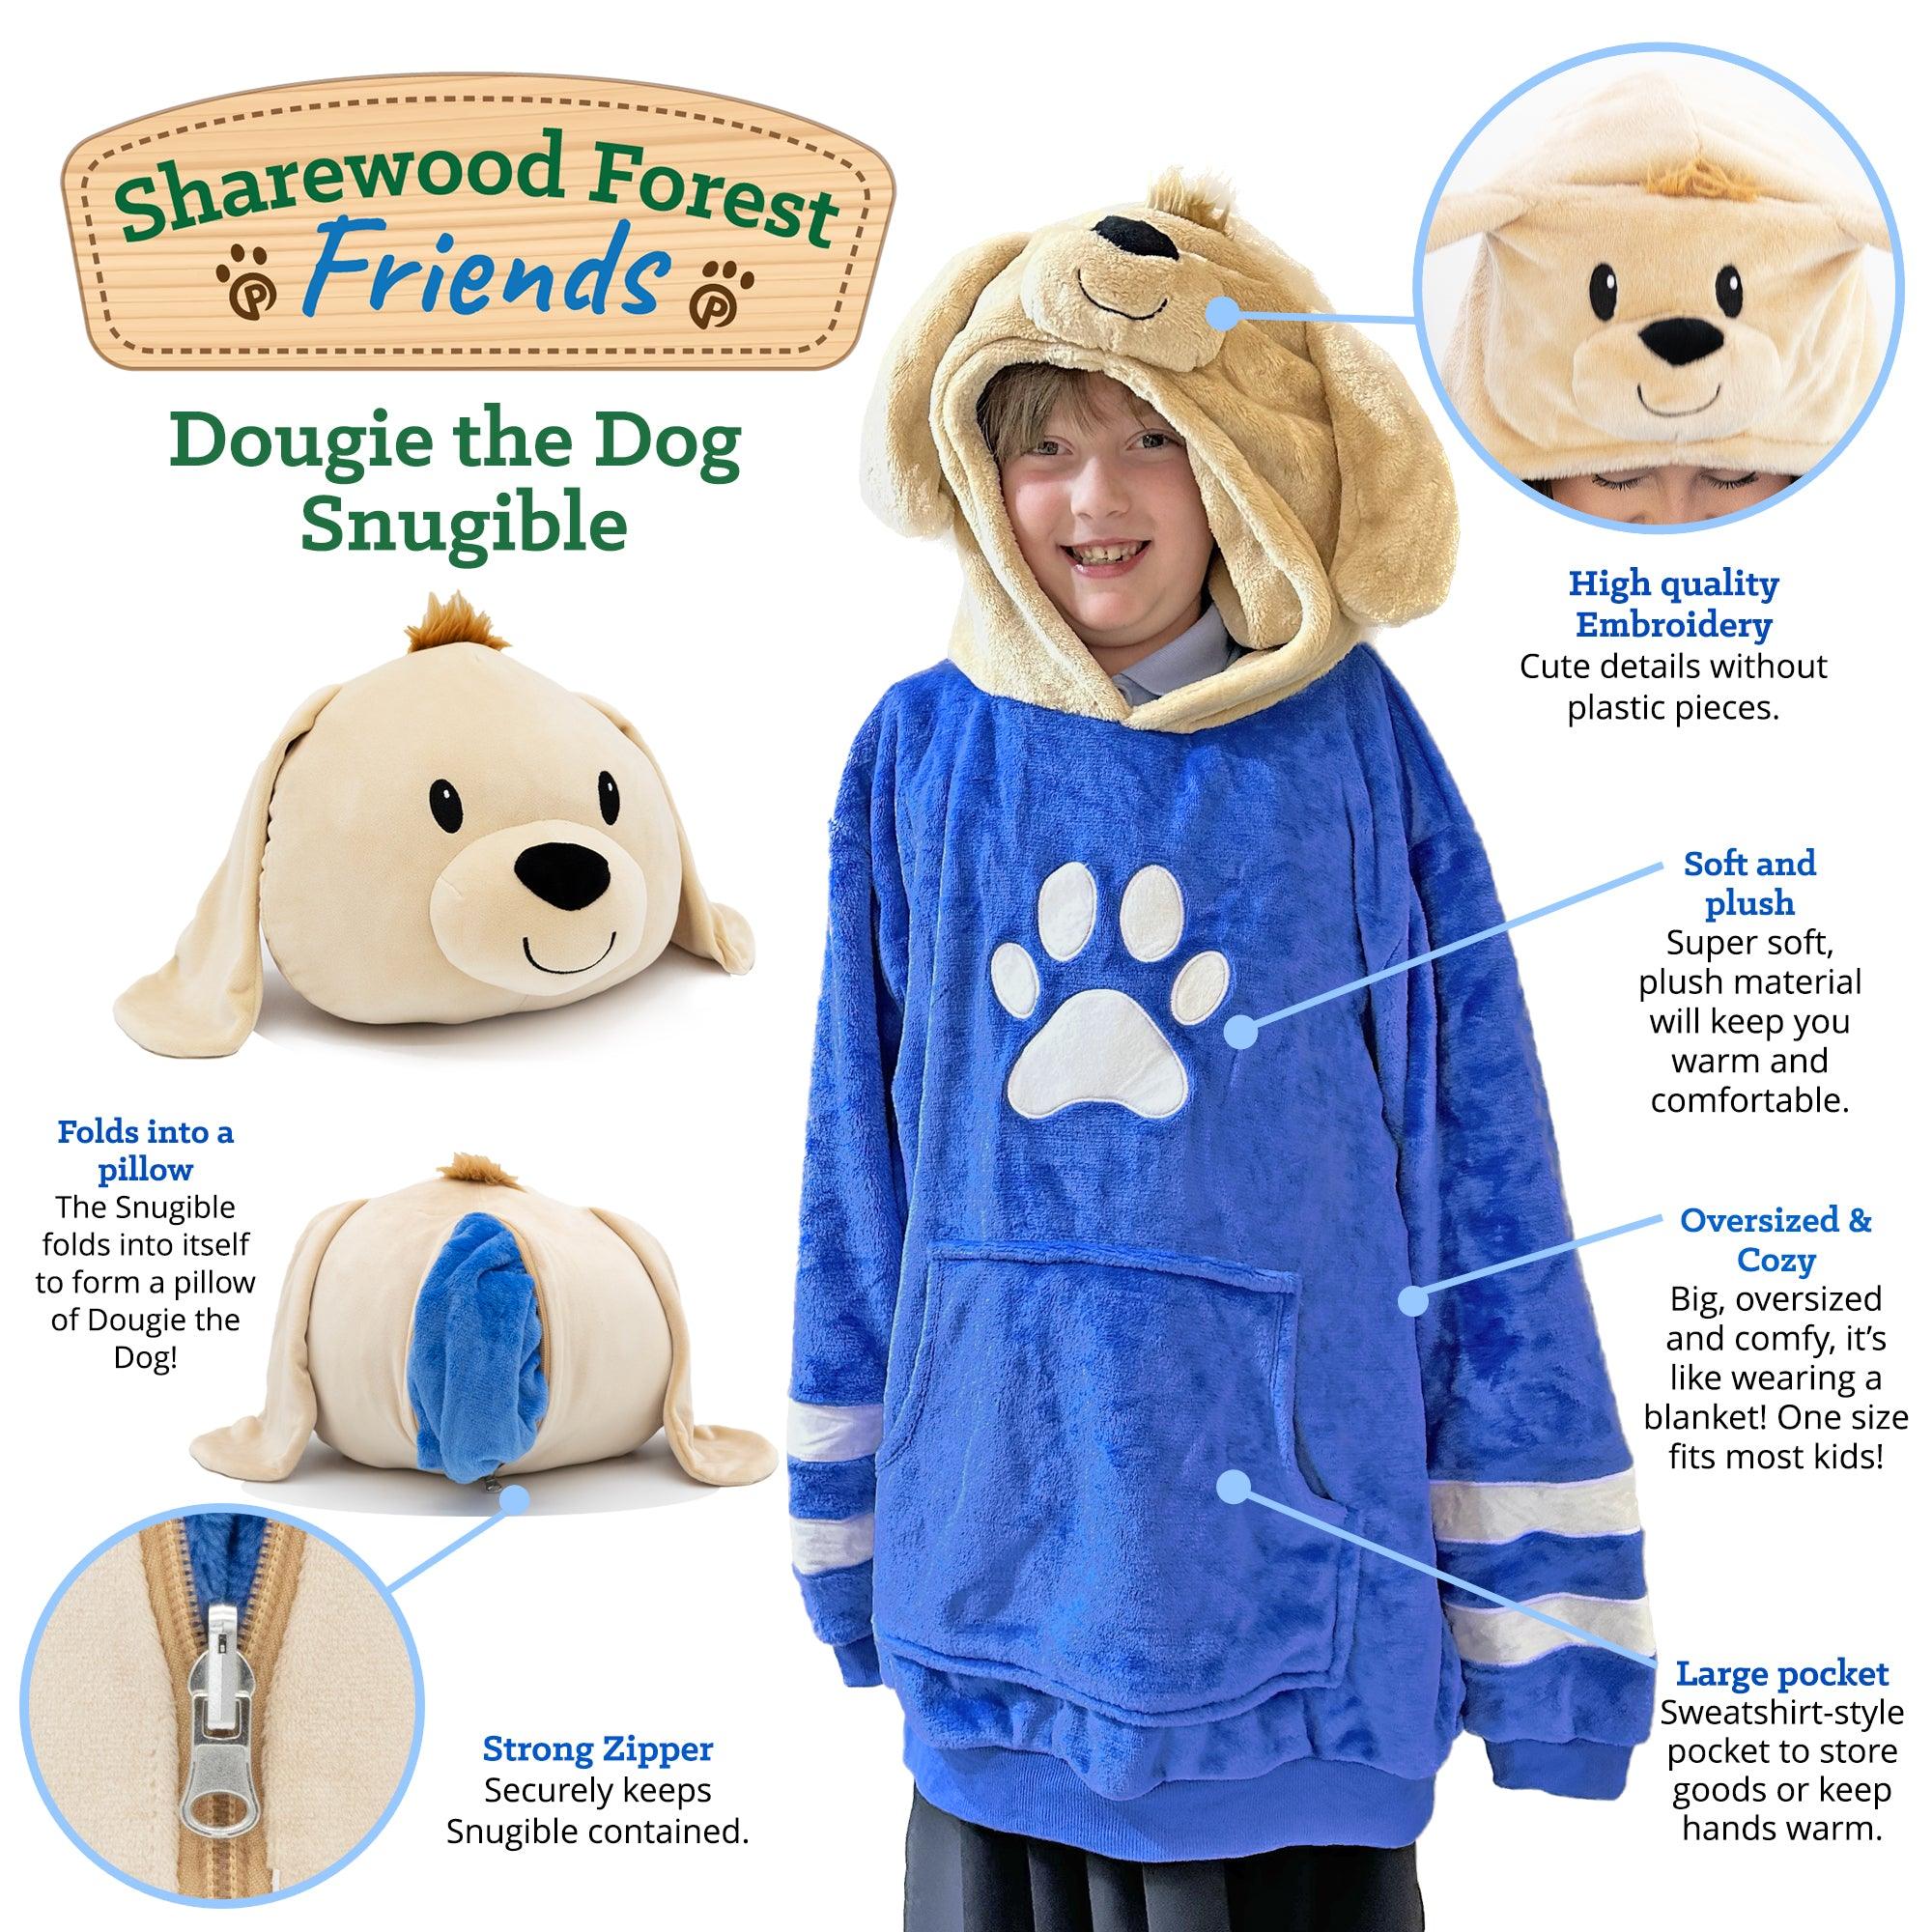 Sharewood Forest Friends 2-in-1 Snugible Dougie the Dog Junior Size - OrangeOnions Wholesale